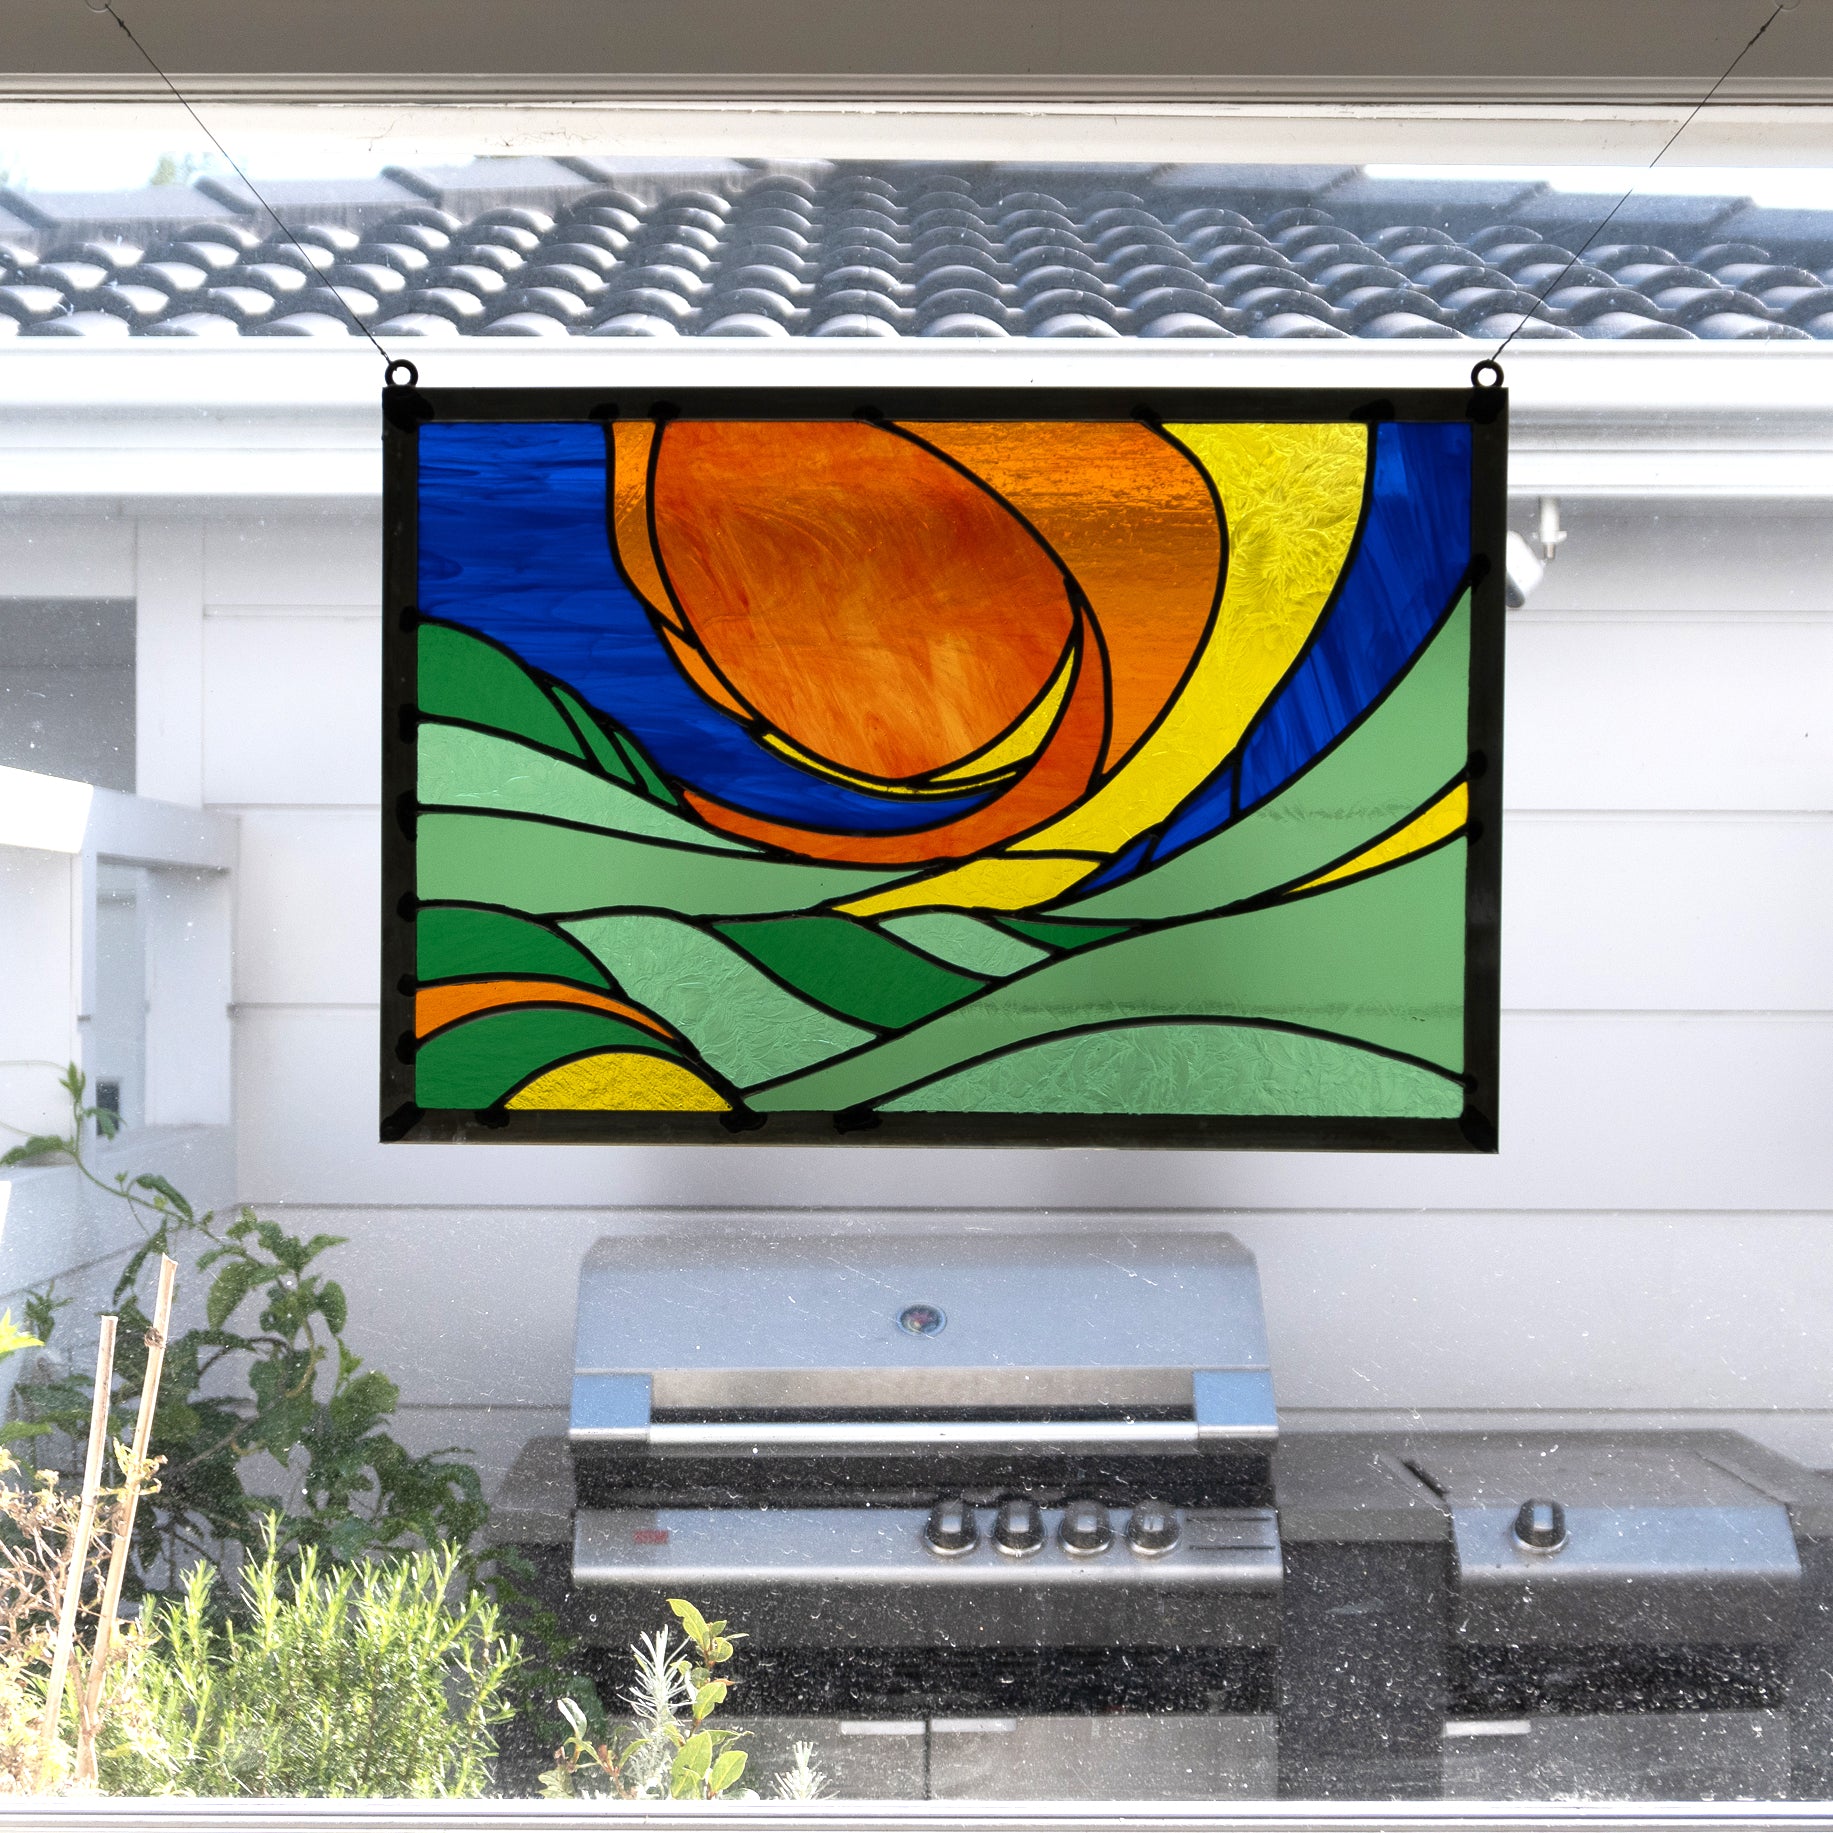 Raising sun, stained glass panel installed